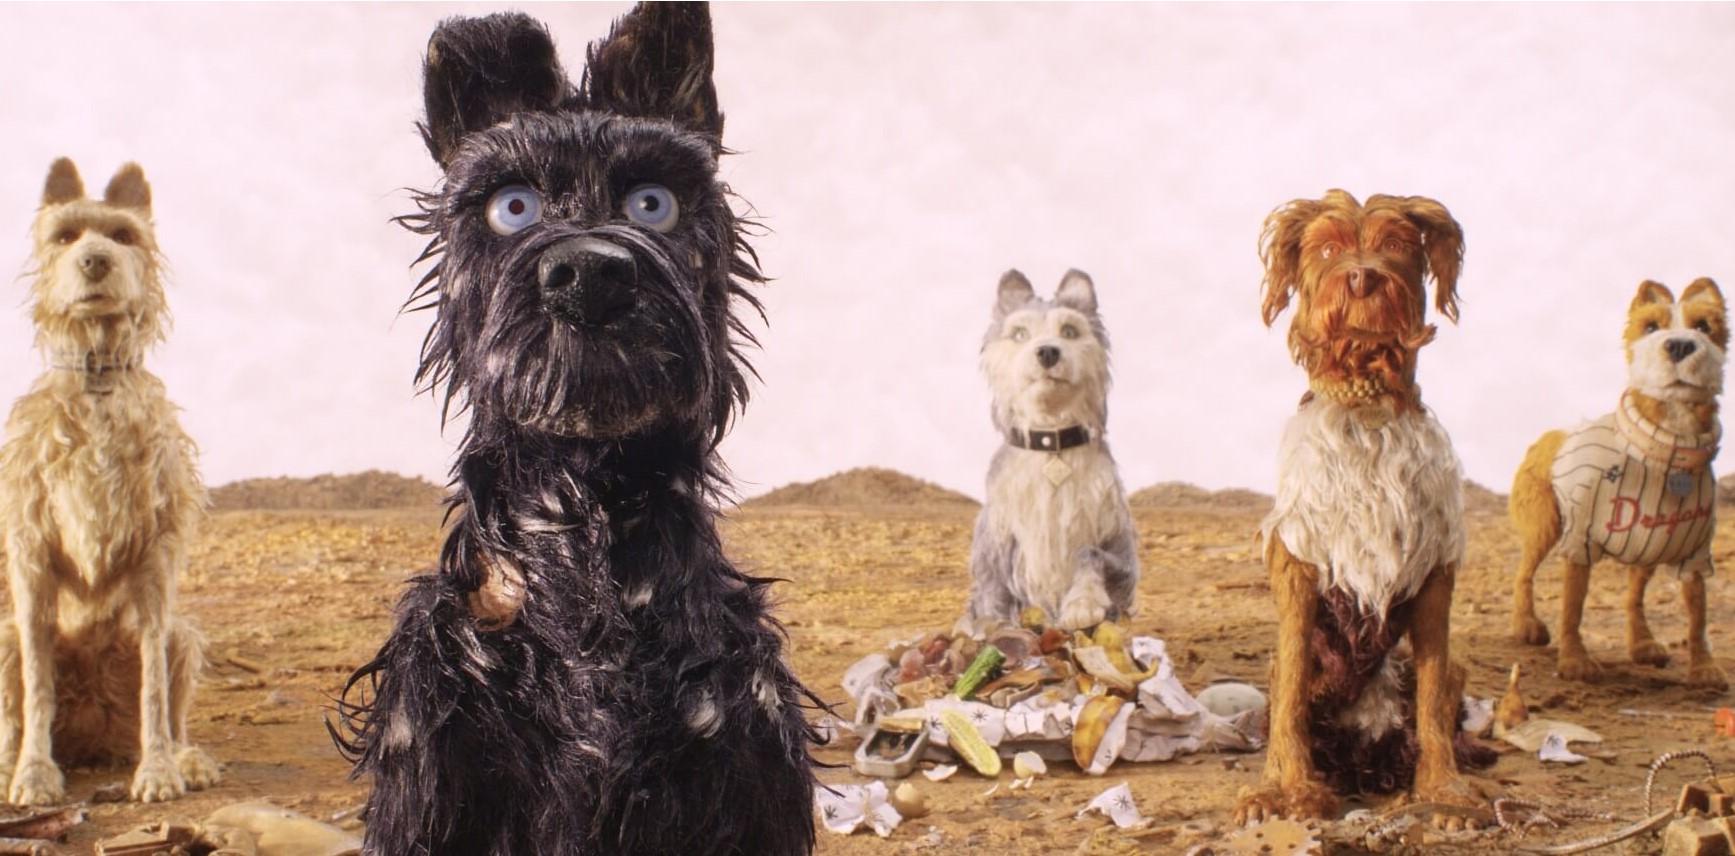 3 28 movies1 isle of dogs